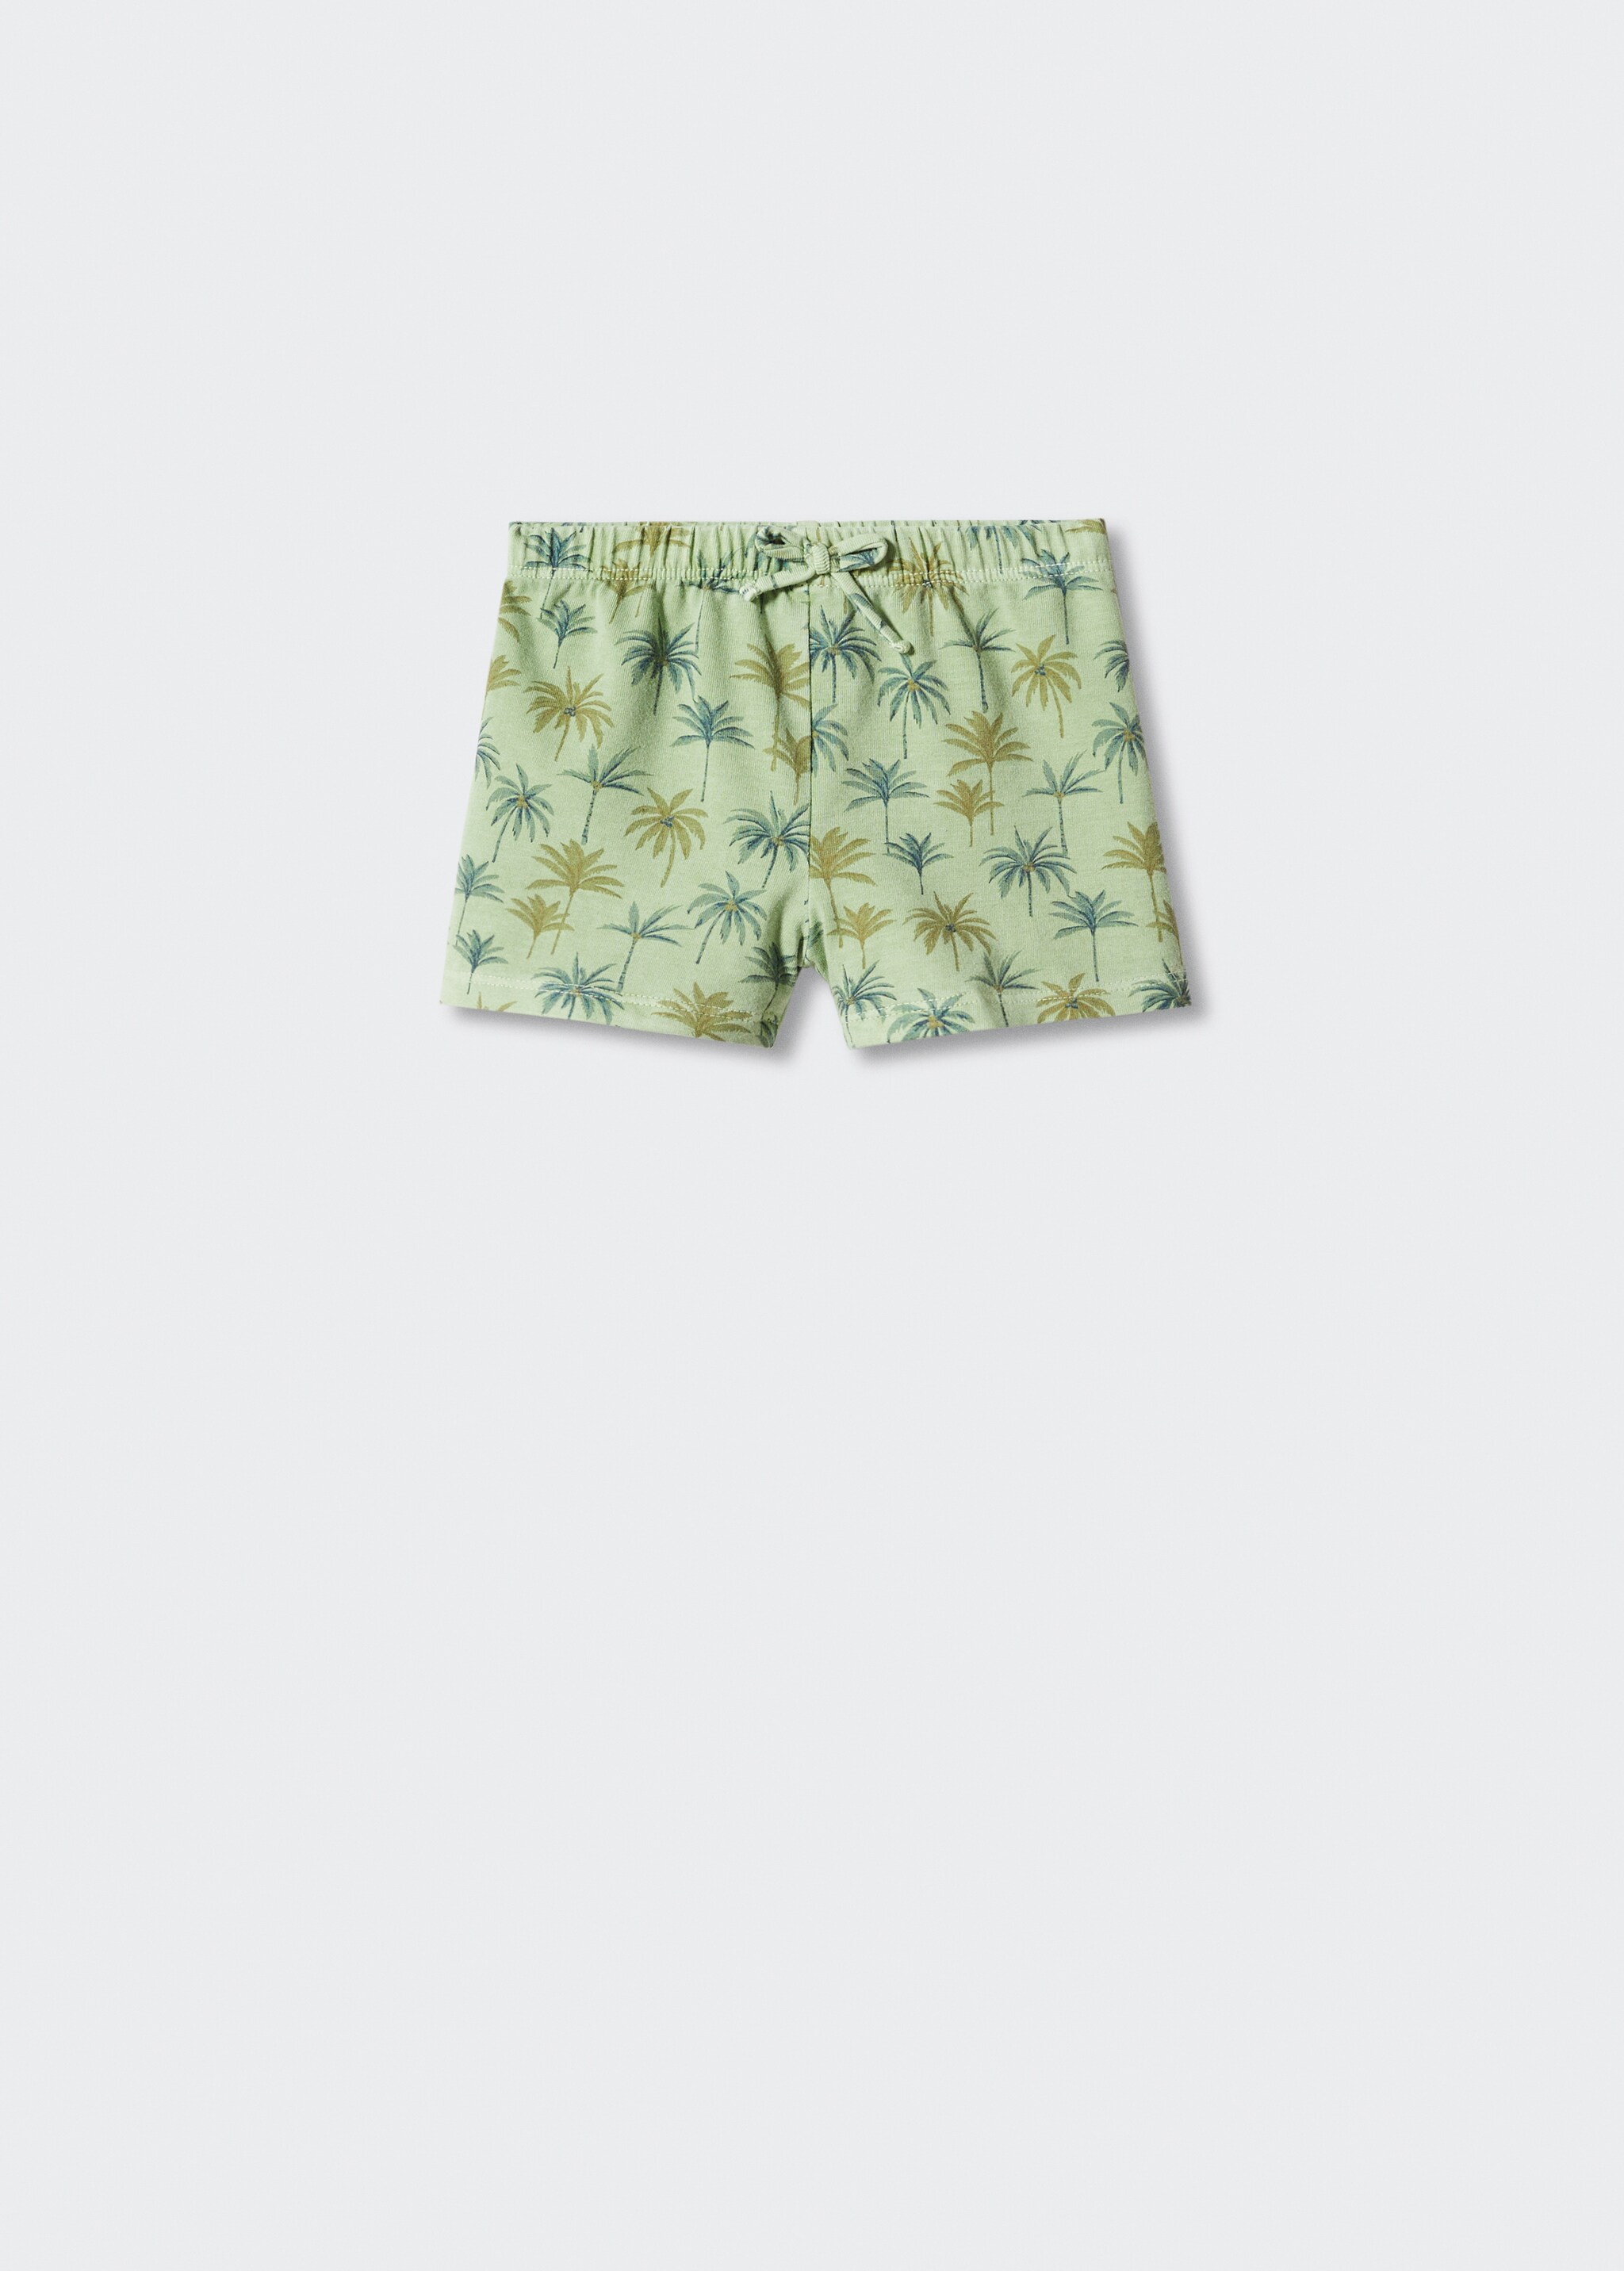 Leaf print swimming trunks - Article without model